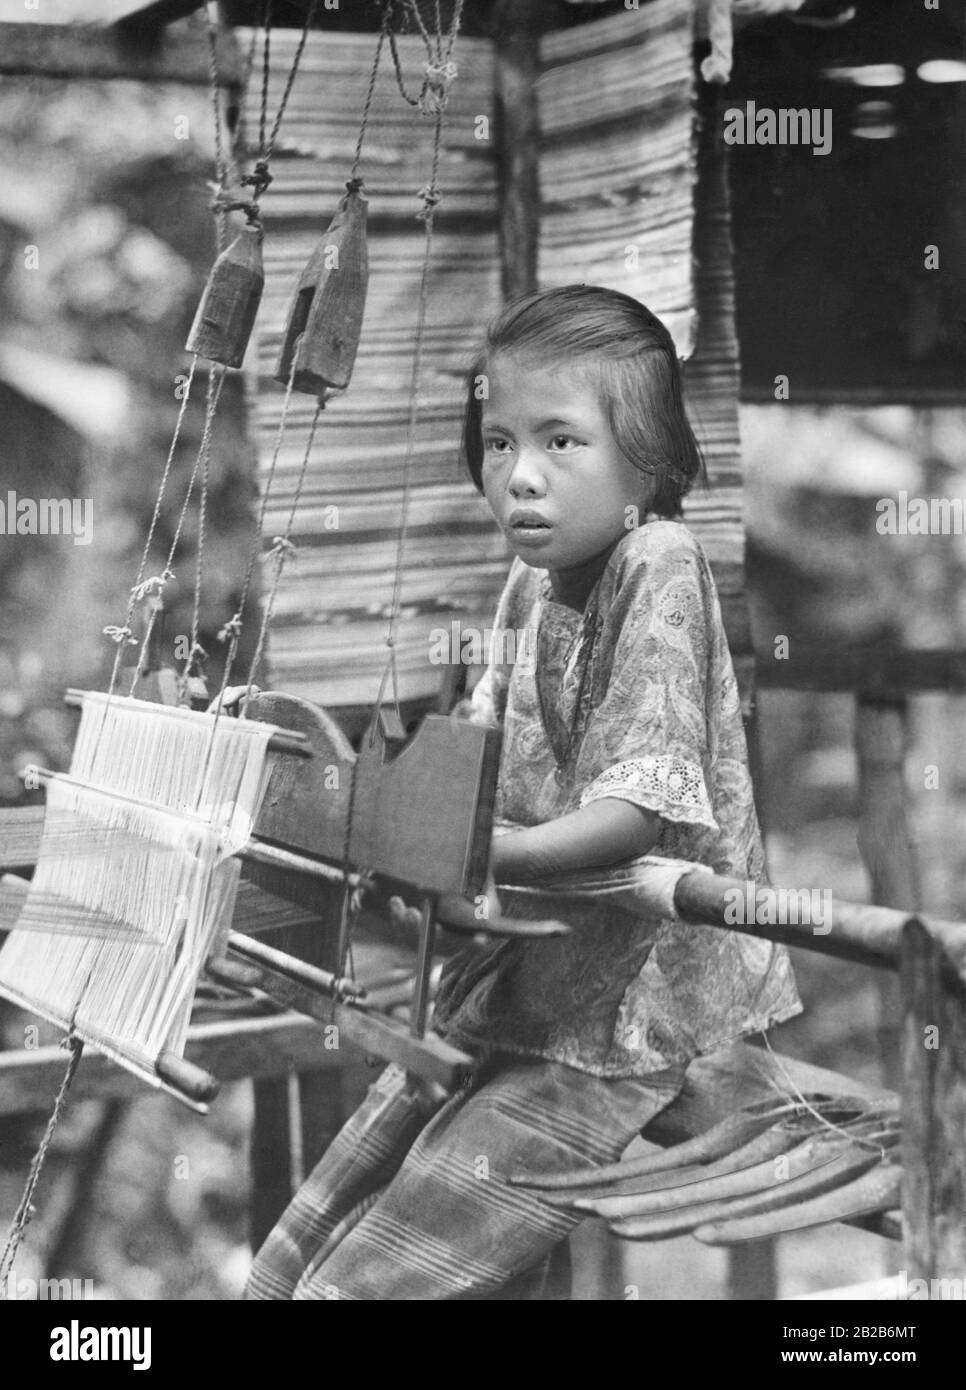 A little girl at the silk weaving mill in North Siam (today's Thailand). Laotian children learn to work at an early age. Silk weaving is an important home industry in this region. Stock Photo